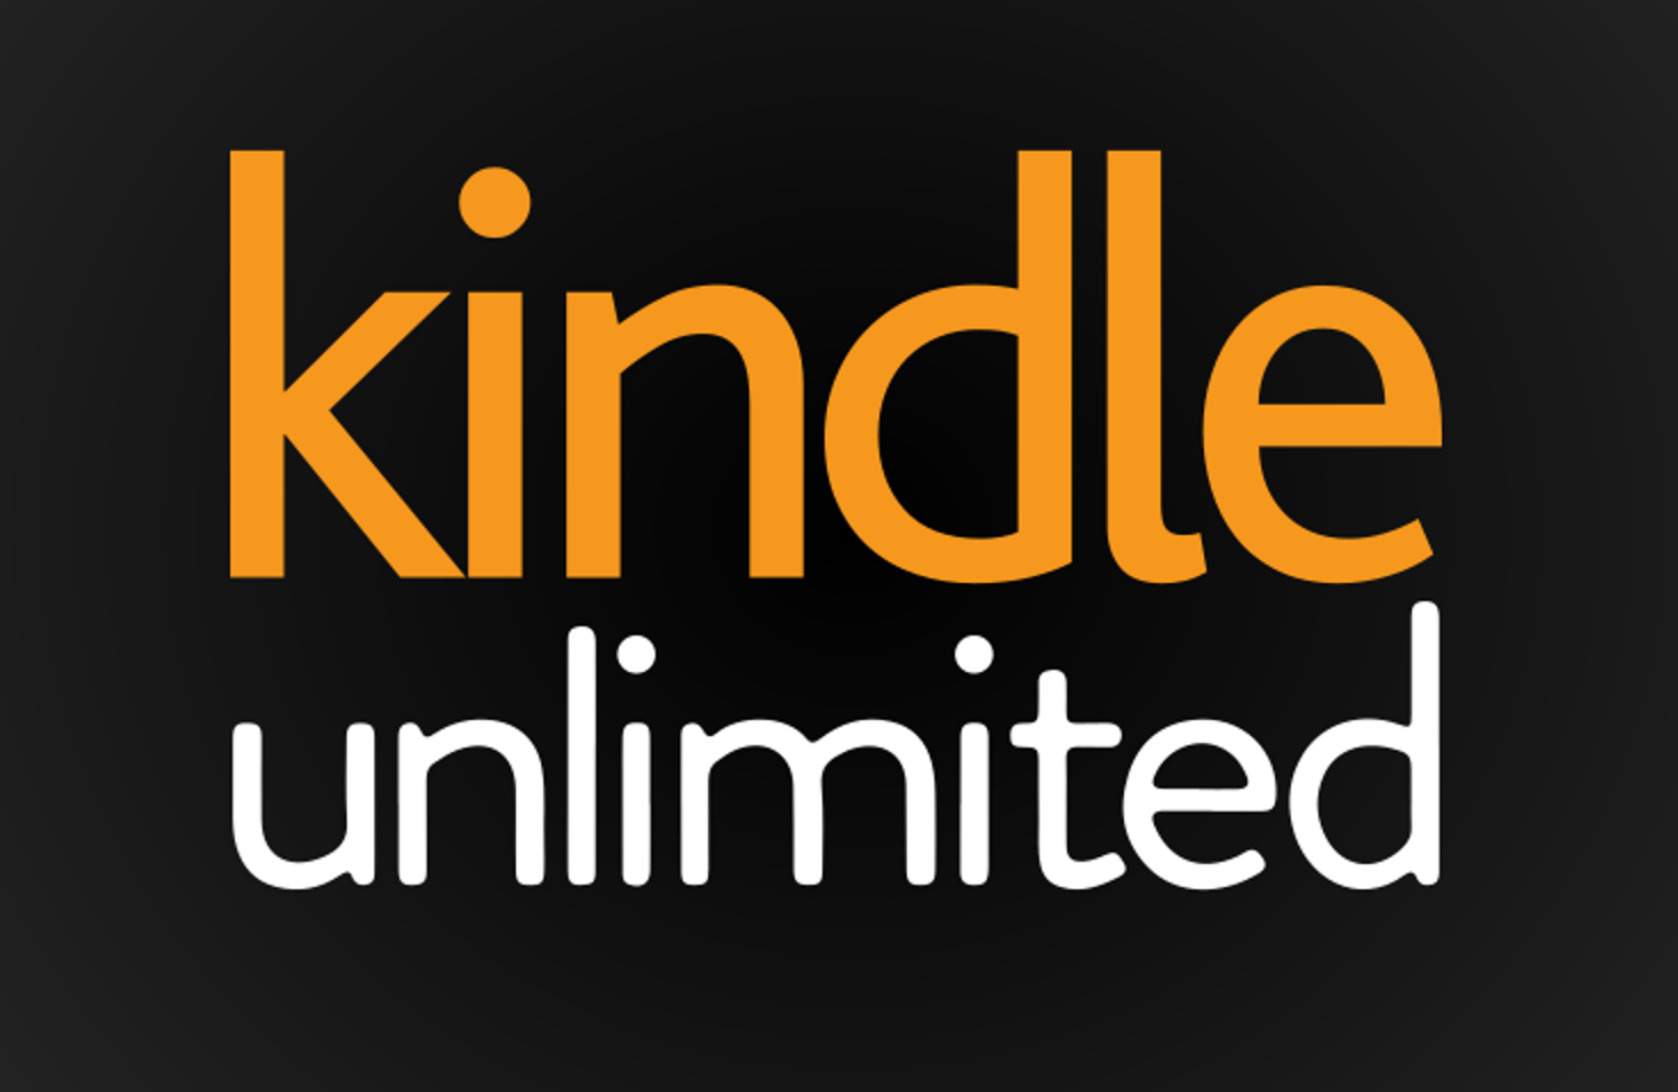 Kindle unlimited: Get 2 months for free